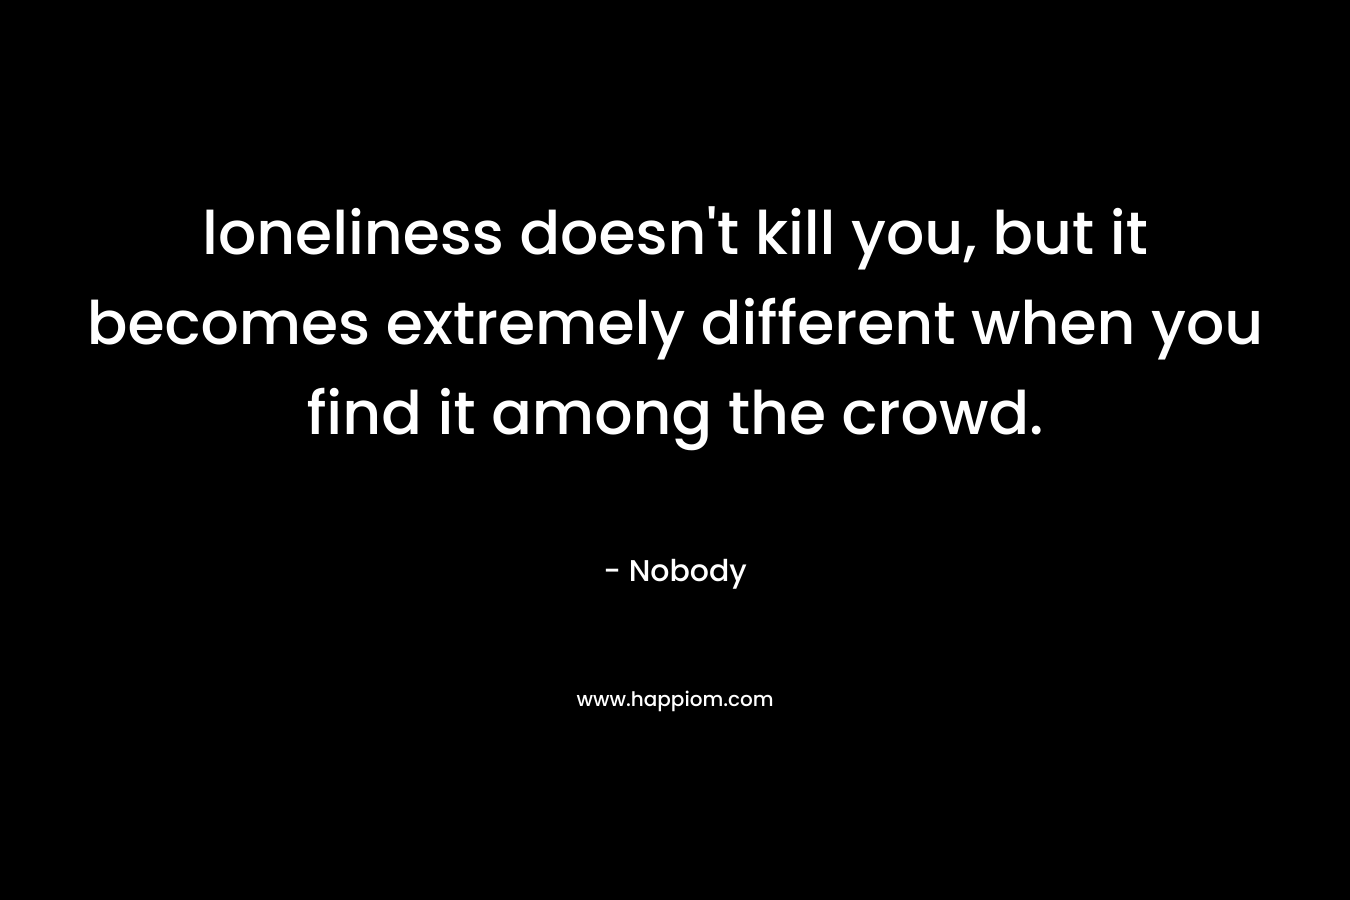 loneliness doesn't kill you, but it becomes extremely different when you find it among the crowd.